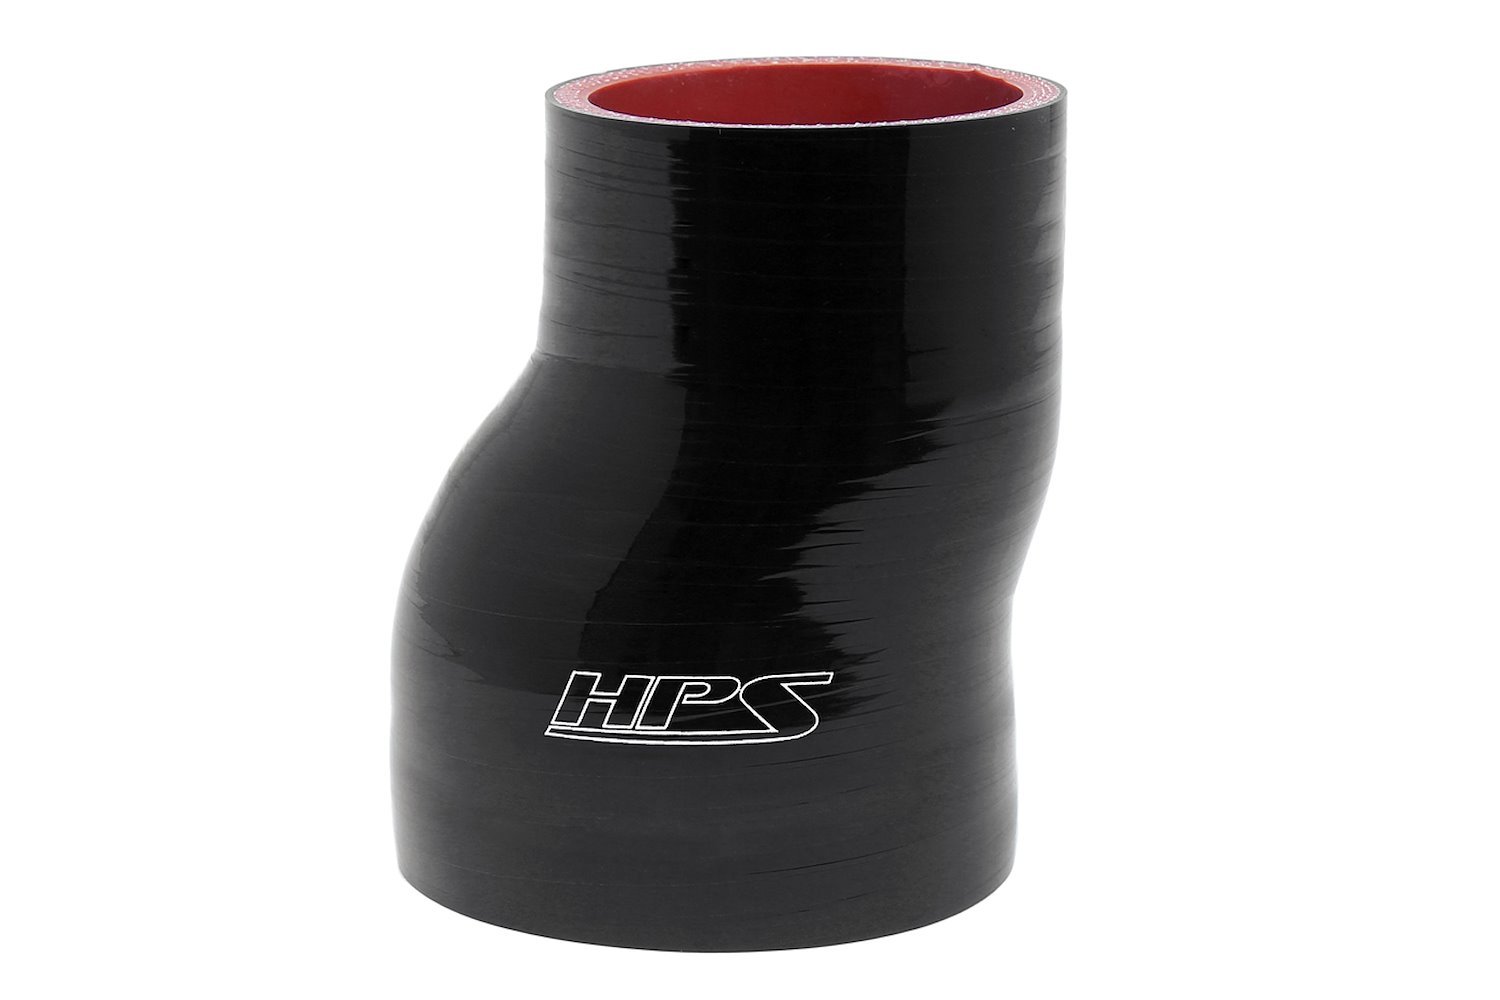 HTSOR-250-300-L6-BLK Silicone Offset Reducer Hose, High-Temp Reinforced, 2-1/2 in. - 3 in. ID, 6 in. Long, Black